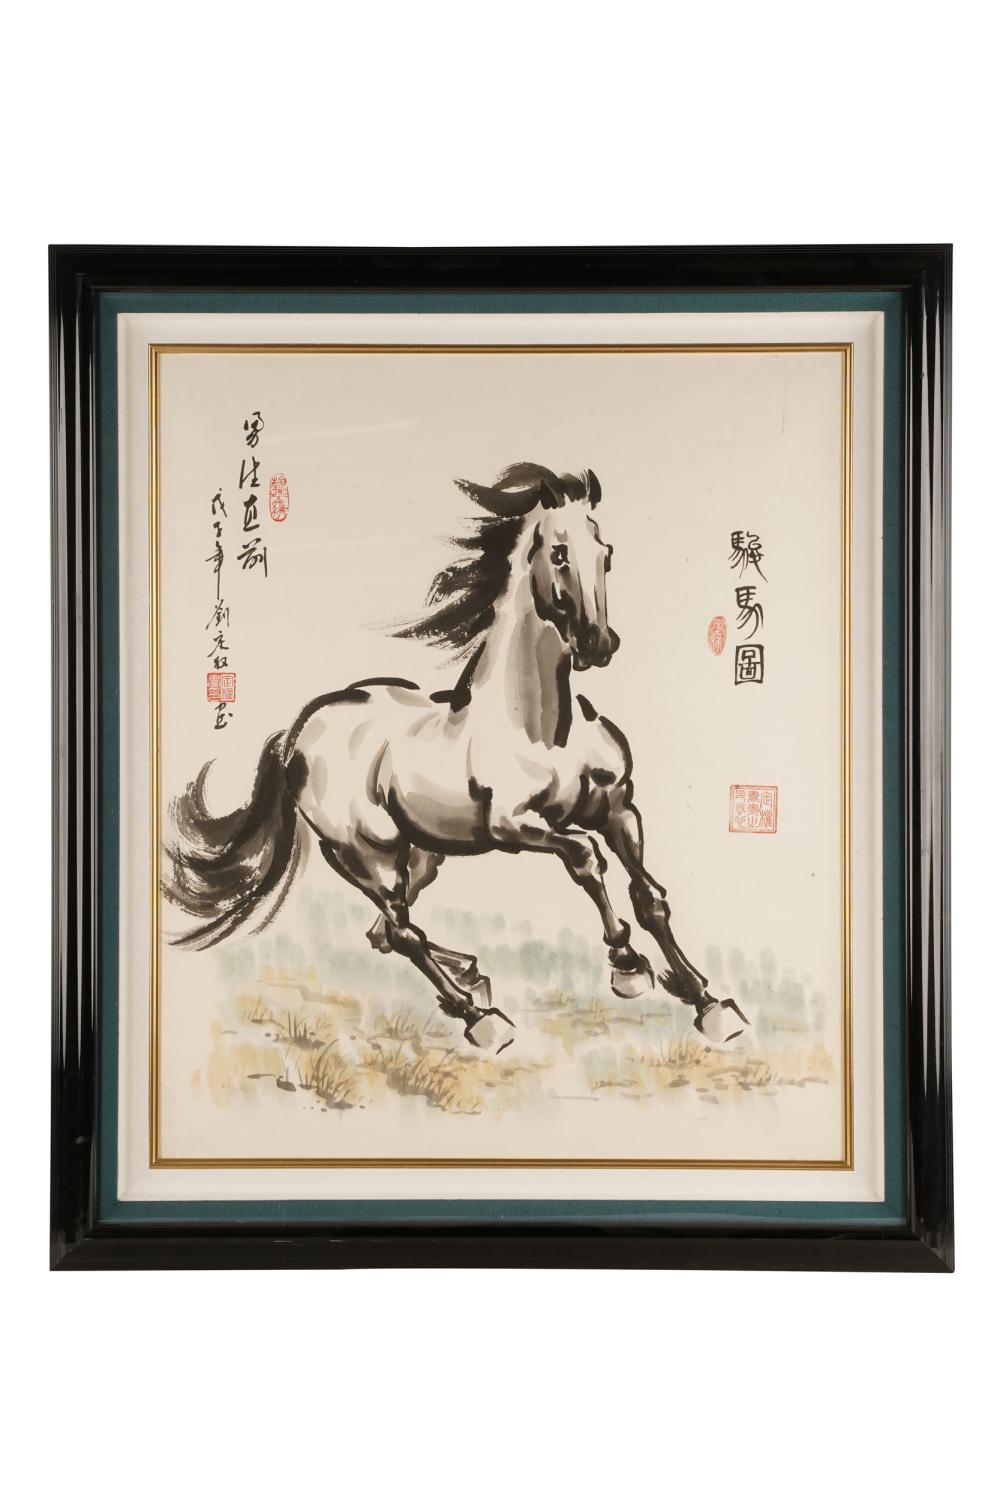 GALLOPING HORSEwatercolor, with label